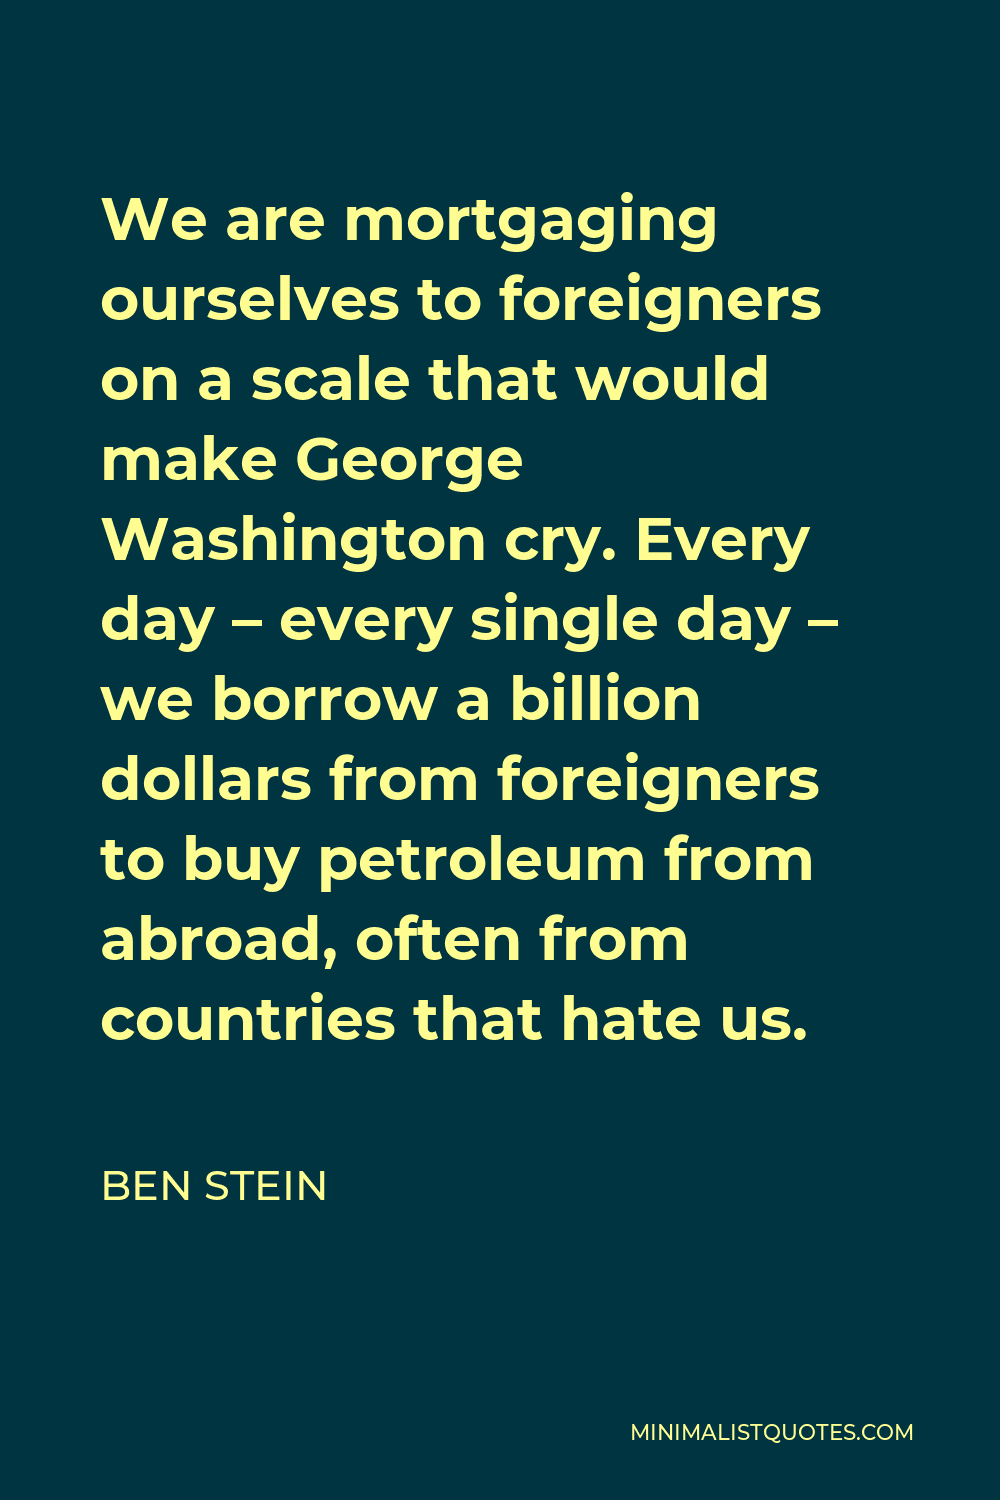 Ben Stein Quote - We are mortgaging ourselves to foreigners on a scale that would make George Washington cry. Every day – every single day – we borrow a billion dollars from foreigners to buy petroleum from abroad, often from countries that hate us.